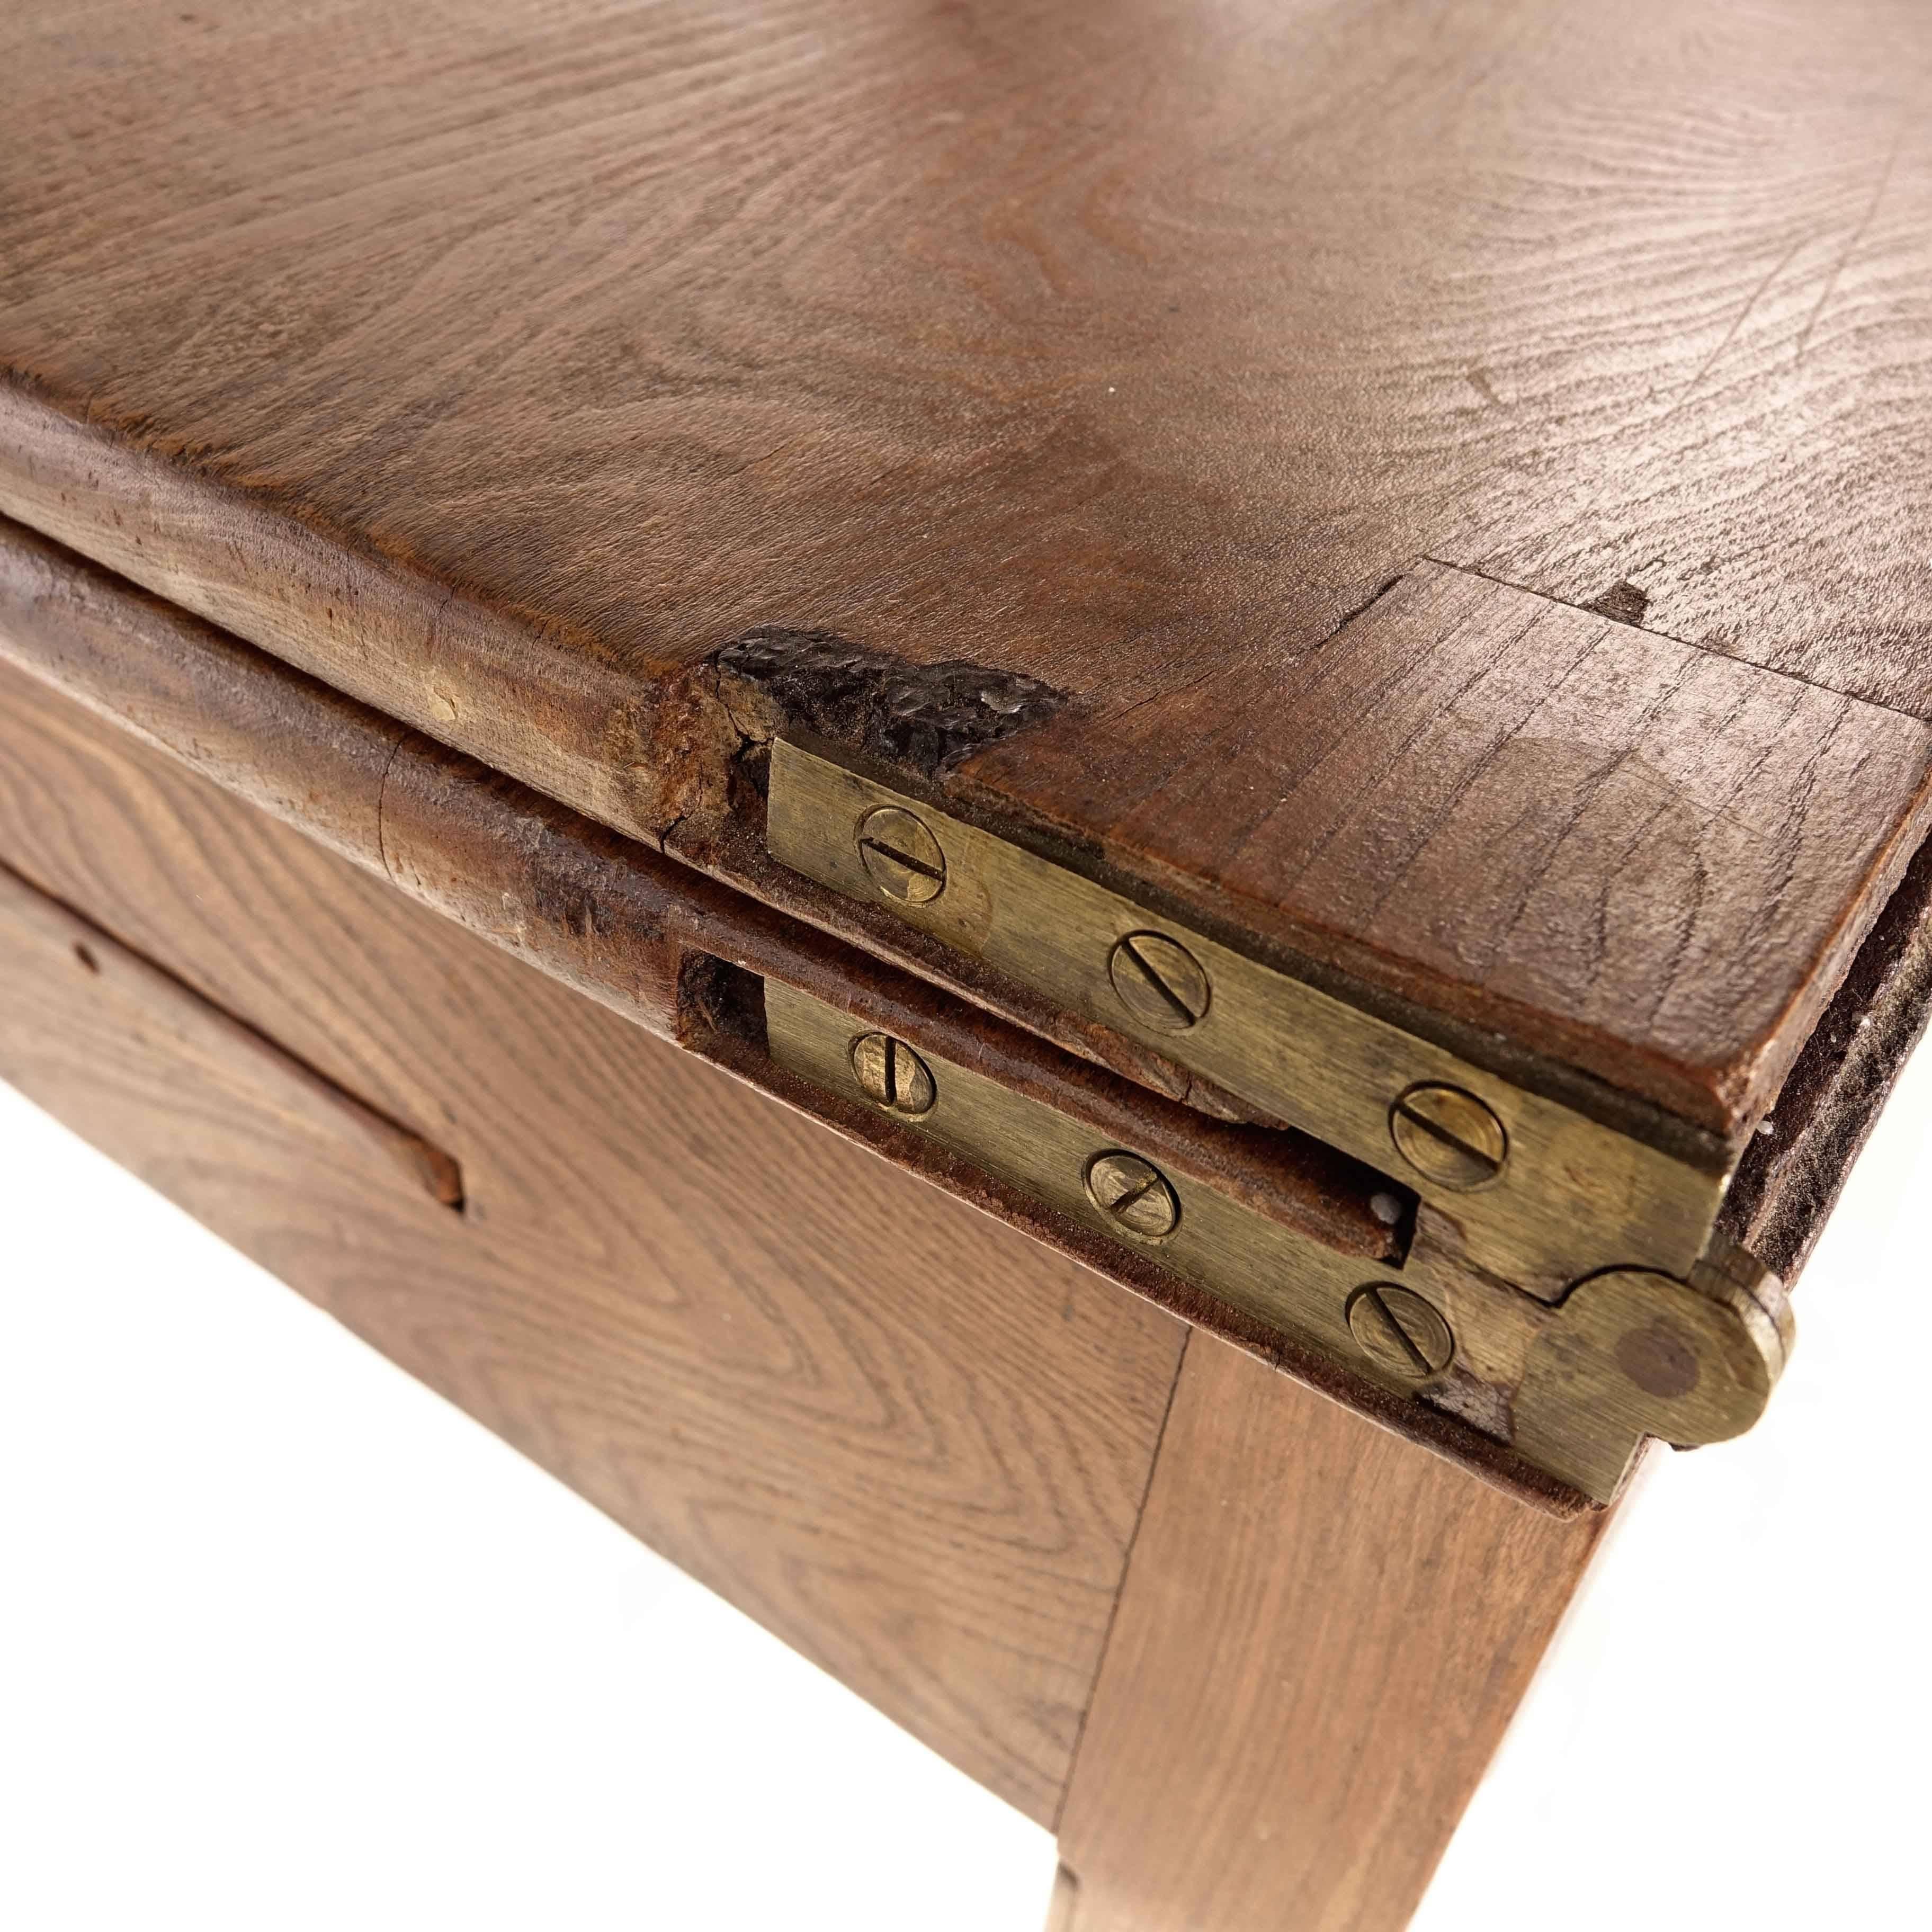 Backgammon game table with beautiful slimmed legs, in a time typical Gustavian design - Oak, Sweden, 1800s. Joinery of extension leg in wood. Brass hinge. Extendable and can be both a side table and a small dining table.
 